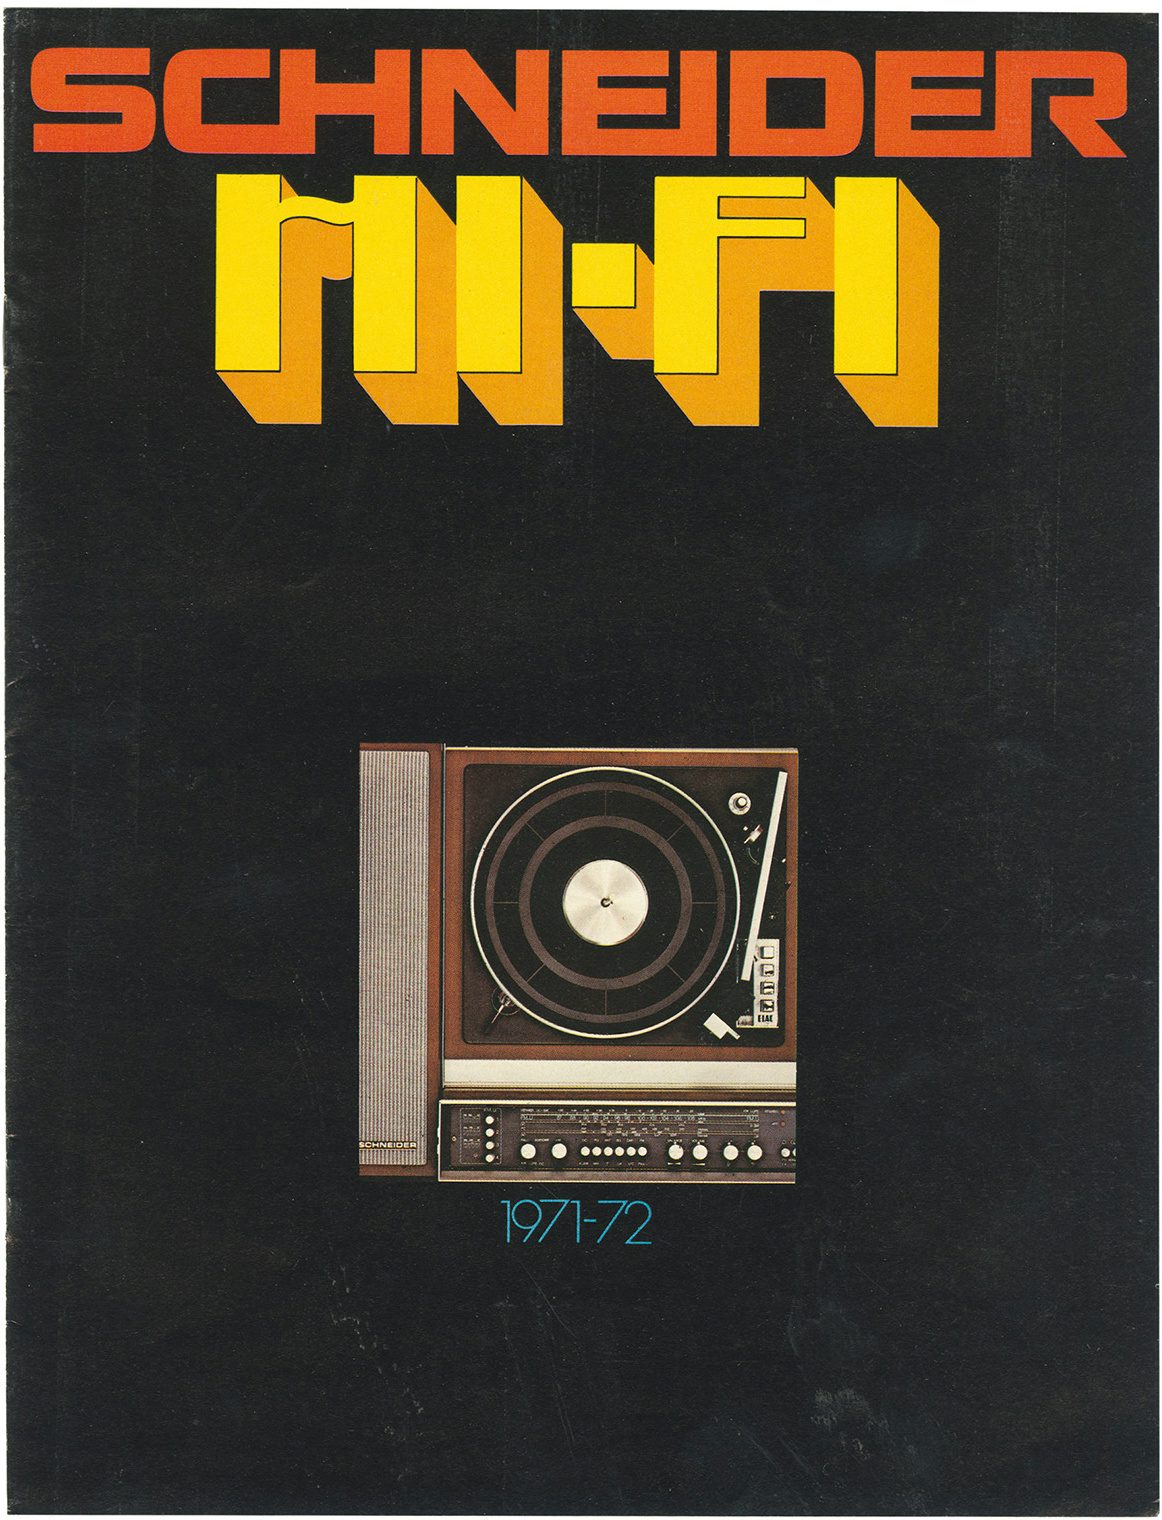 Poster showing an illustration of a piece of hi-fi equipment against a black background. The top of the poster reads 'Schneider Hi-Fi' in an angular retrofuturistic font